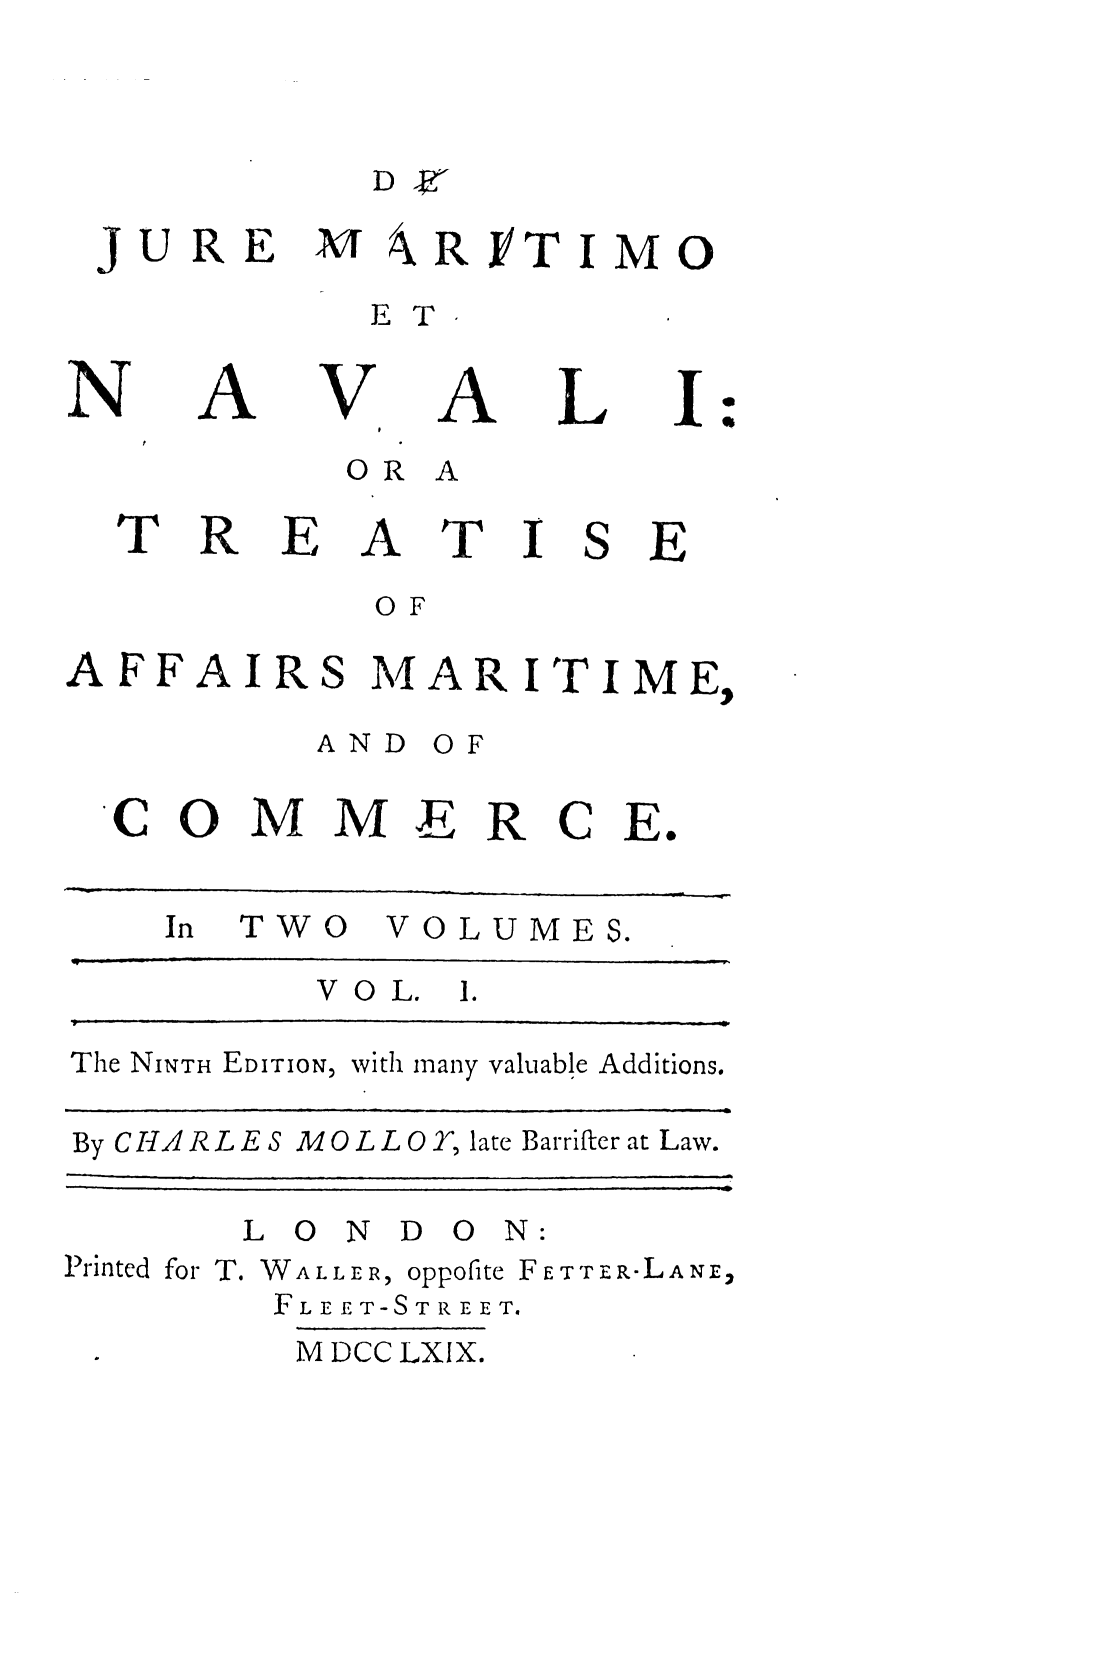 handle is hein.beal/jmnta0001 and id is 1 raw text is: JURE

A4 RYTIMO

E T

A

V

A

L

I

O R A

I

SE

AFFAIRS

MAR ITIME,

A N D

C O

MME R

C E.

In   TWO      VOLUMES.
VOL.     I.
The NINTH EDITION, with many valuable Additions.
By C HA R L E S M OL L OT, late Barrifter at Law.

L O N D

ON:

Printed for T. WALLER, oppofite FE TT ER-LANE,
FLEET-STREET.

M DCC LXIX.

N

T

R

:

E

A

T

O F

O F

.


